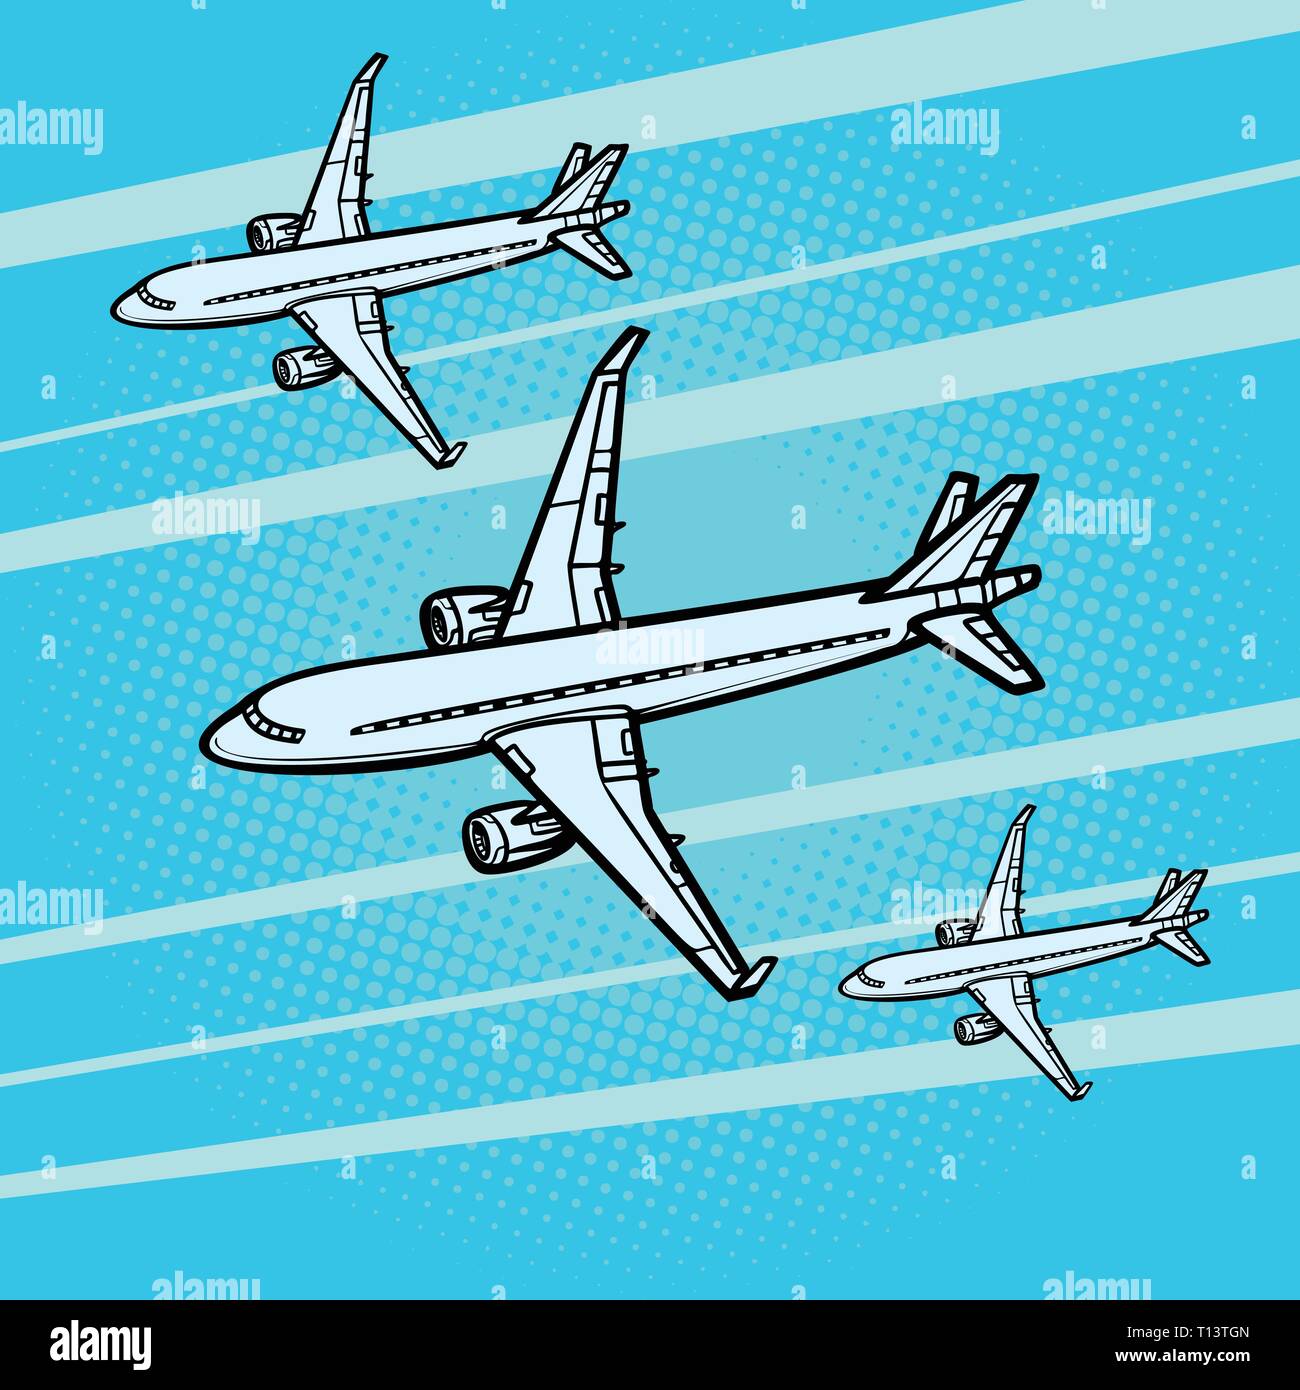 several passenger Airliners aircraft air transport Stock Vector